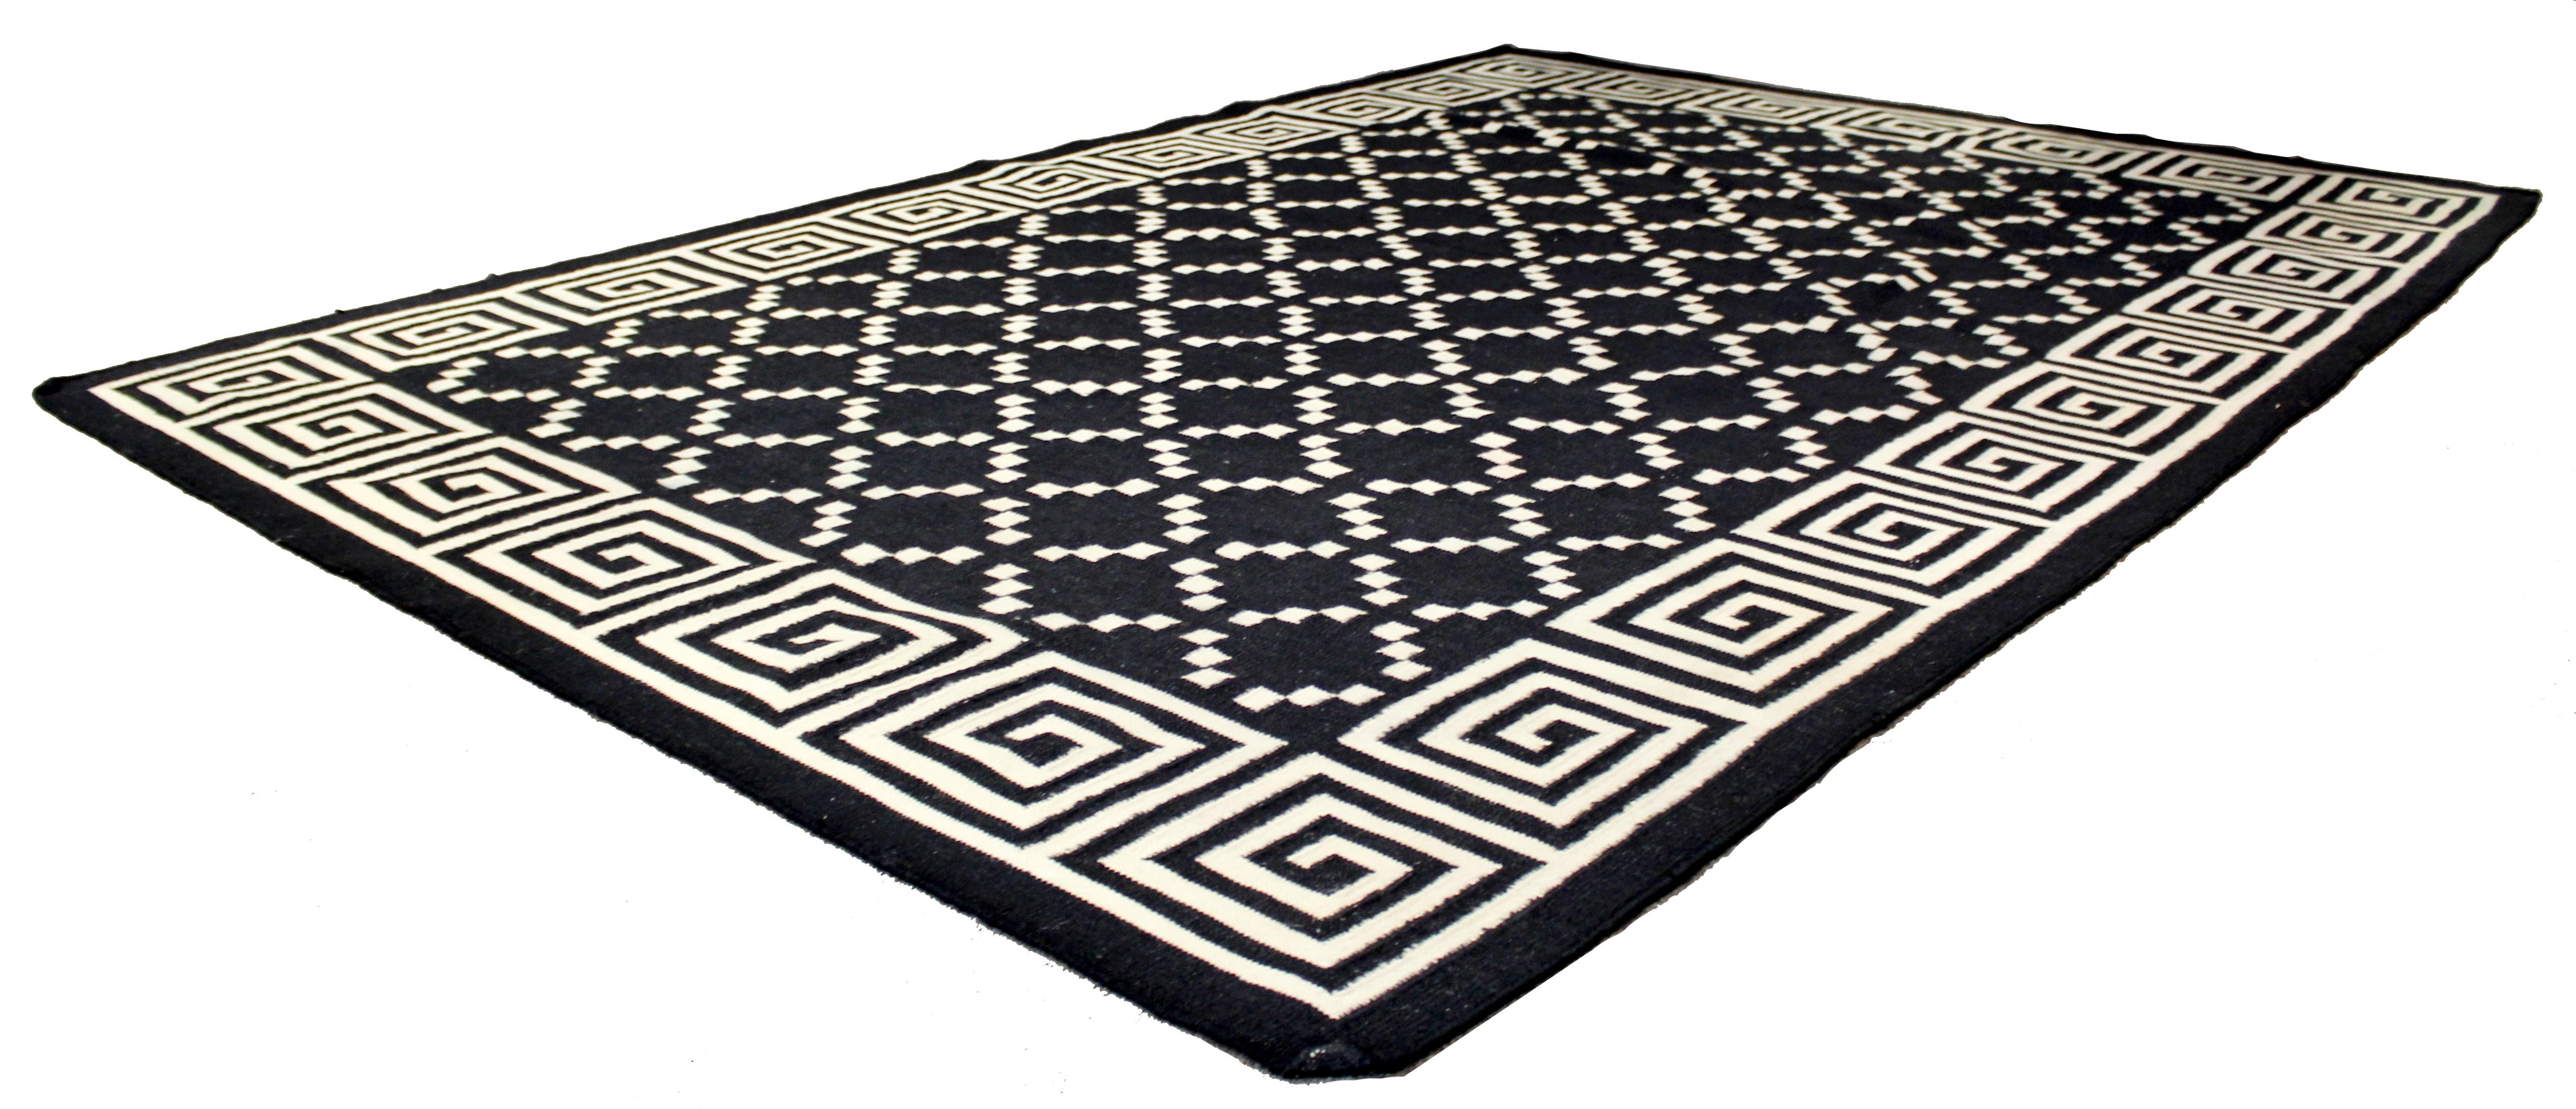 For your consideration is a wonderful, black and white, rectangular, Indian Dhurrie area rug or carpet. In excellent condition. The dimensions are 107